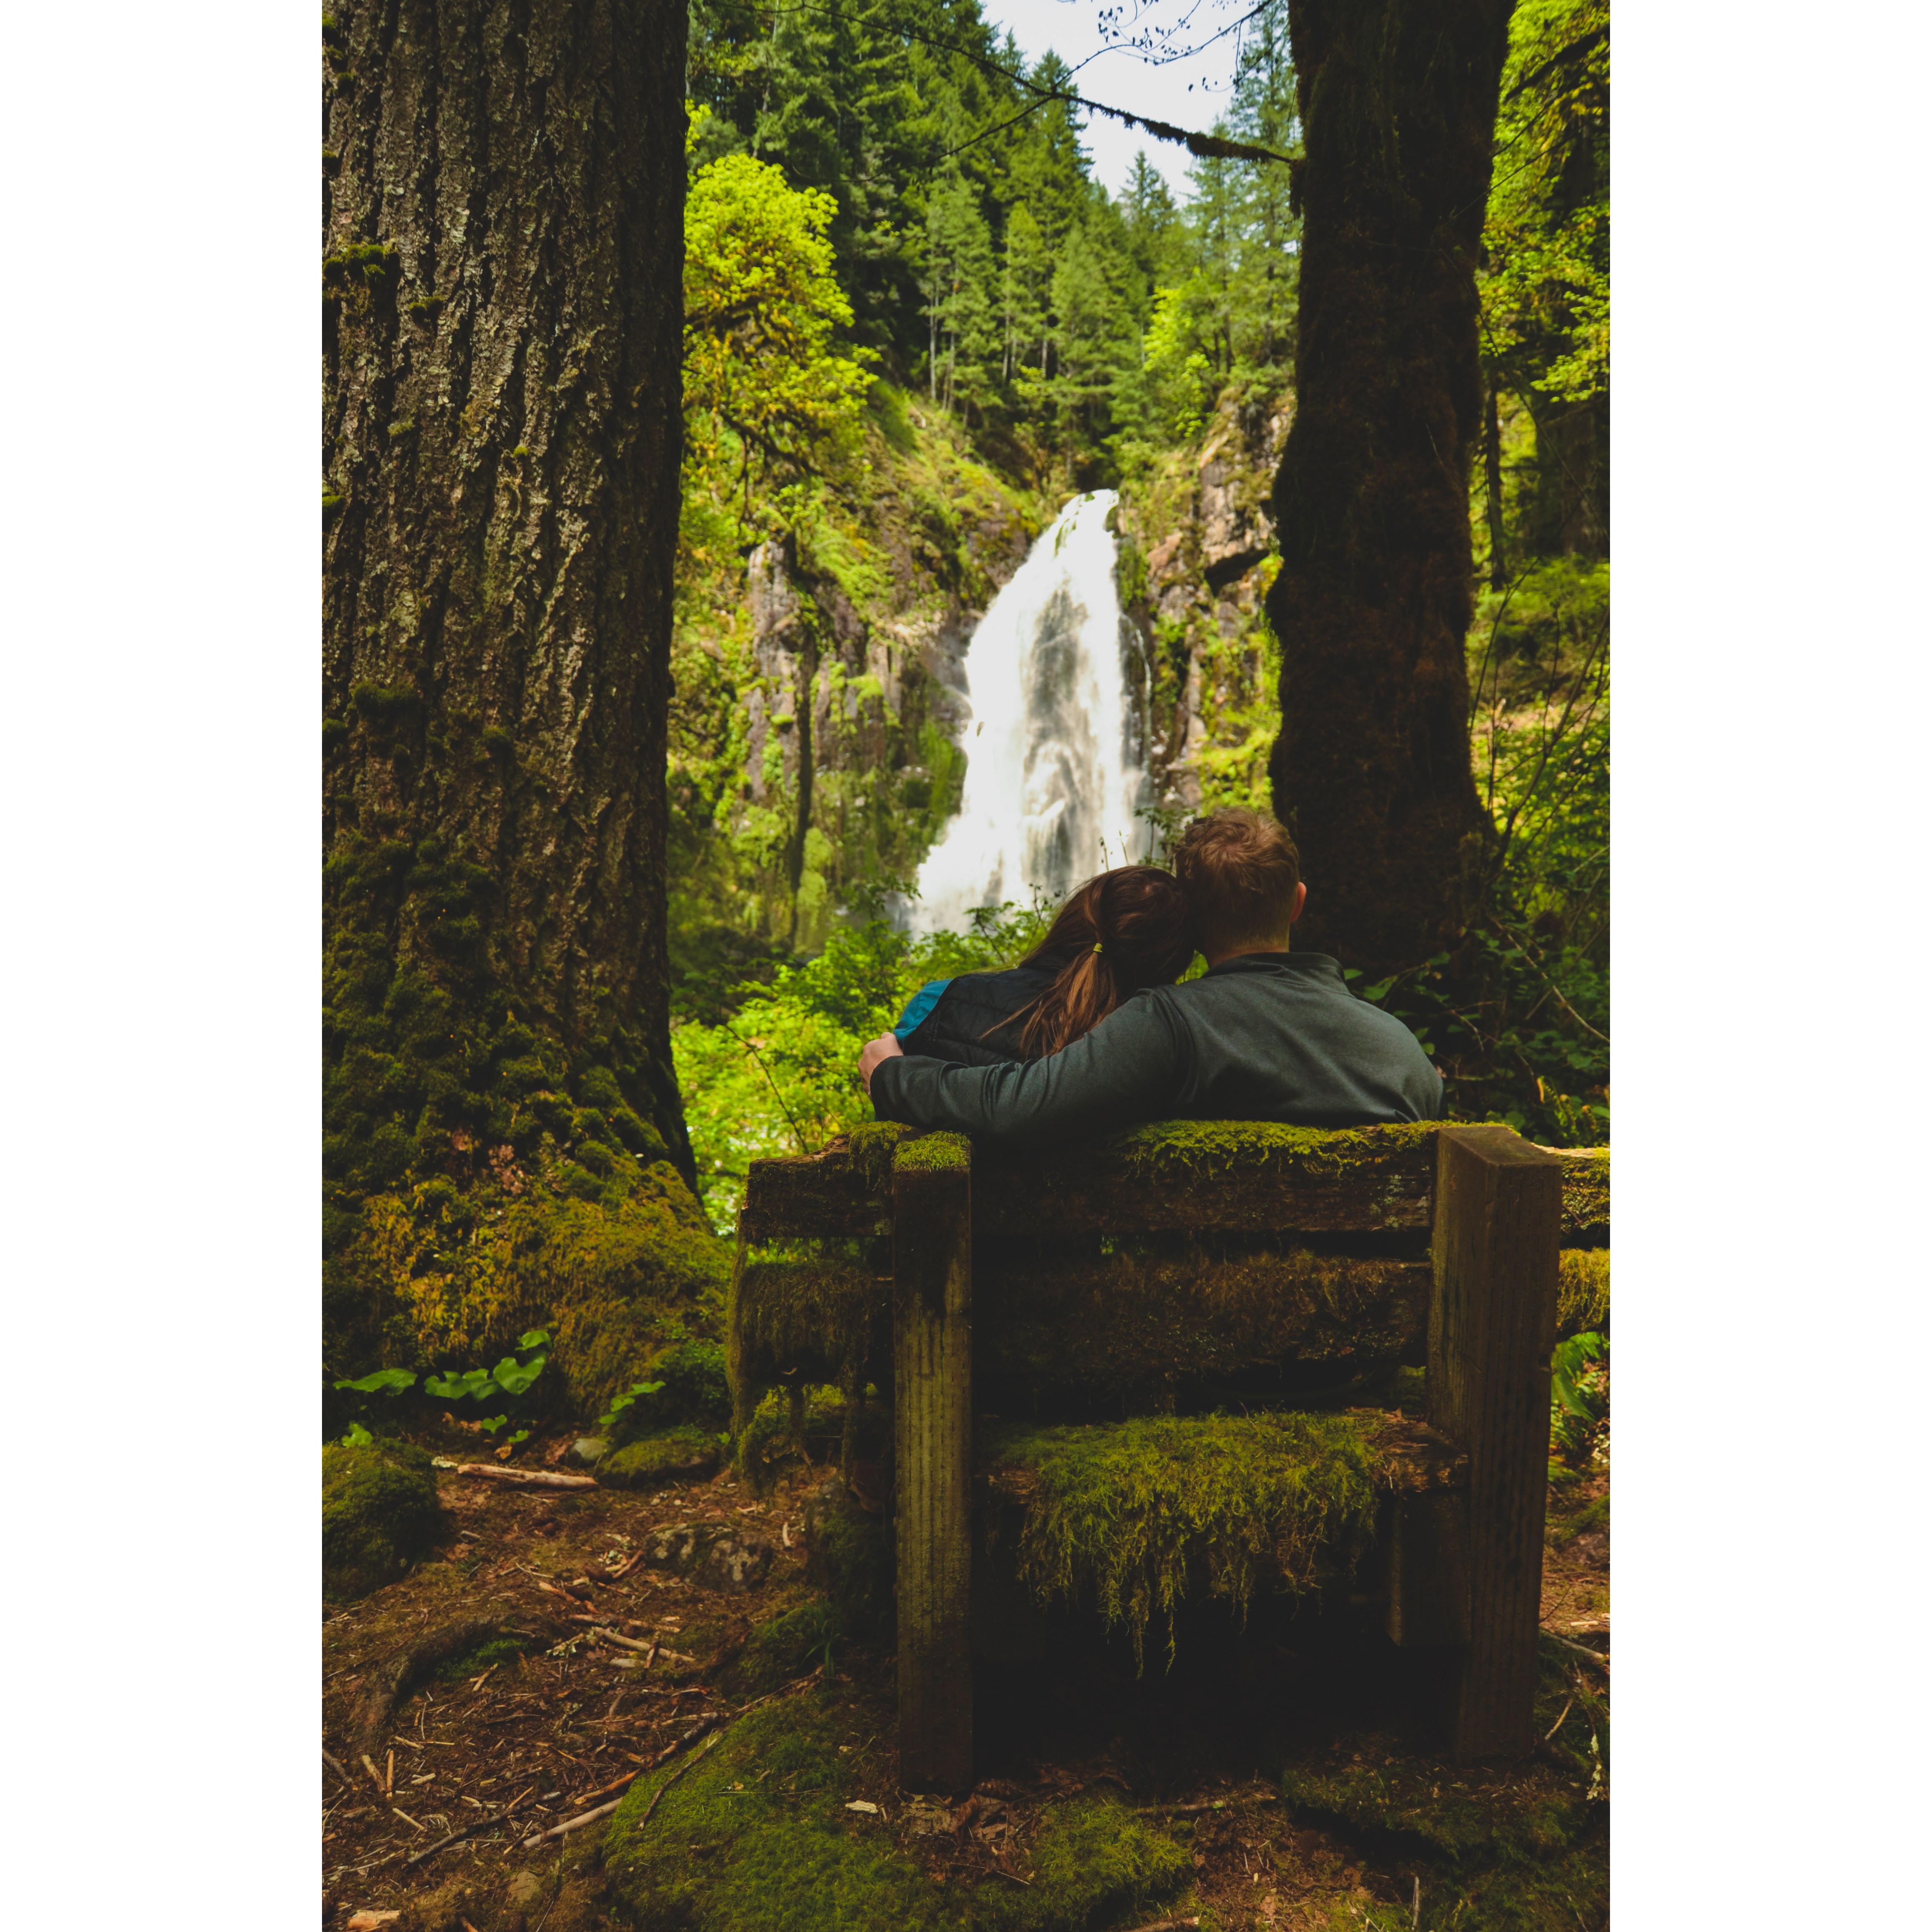 Of the main trail across the creek and through some bushes was this cool mossy, abandoned bench with an awesome waterfall view.